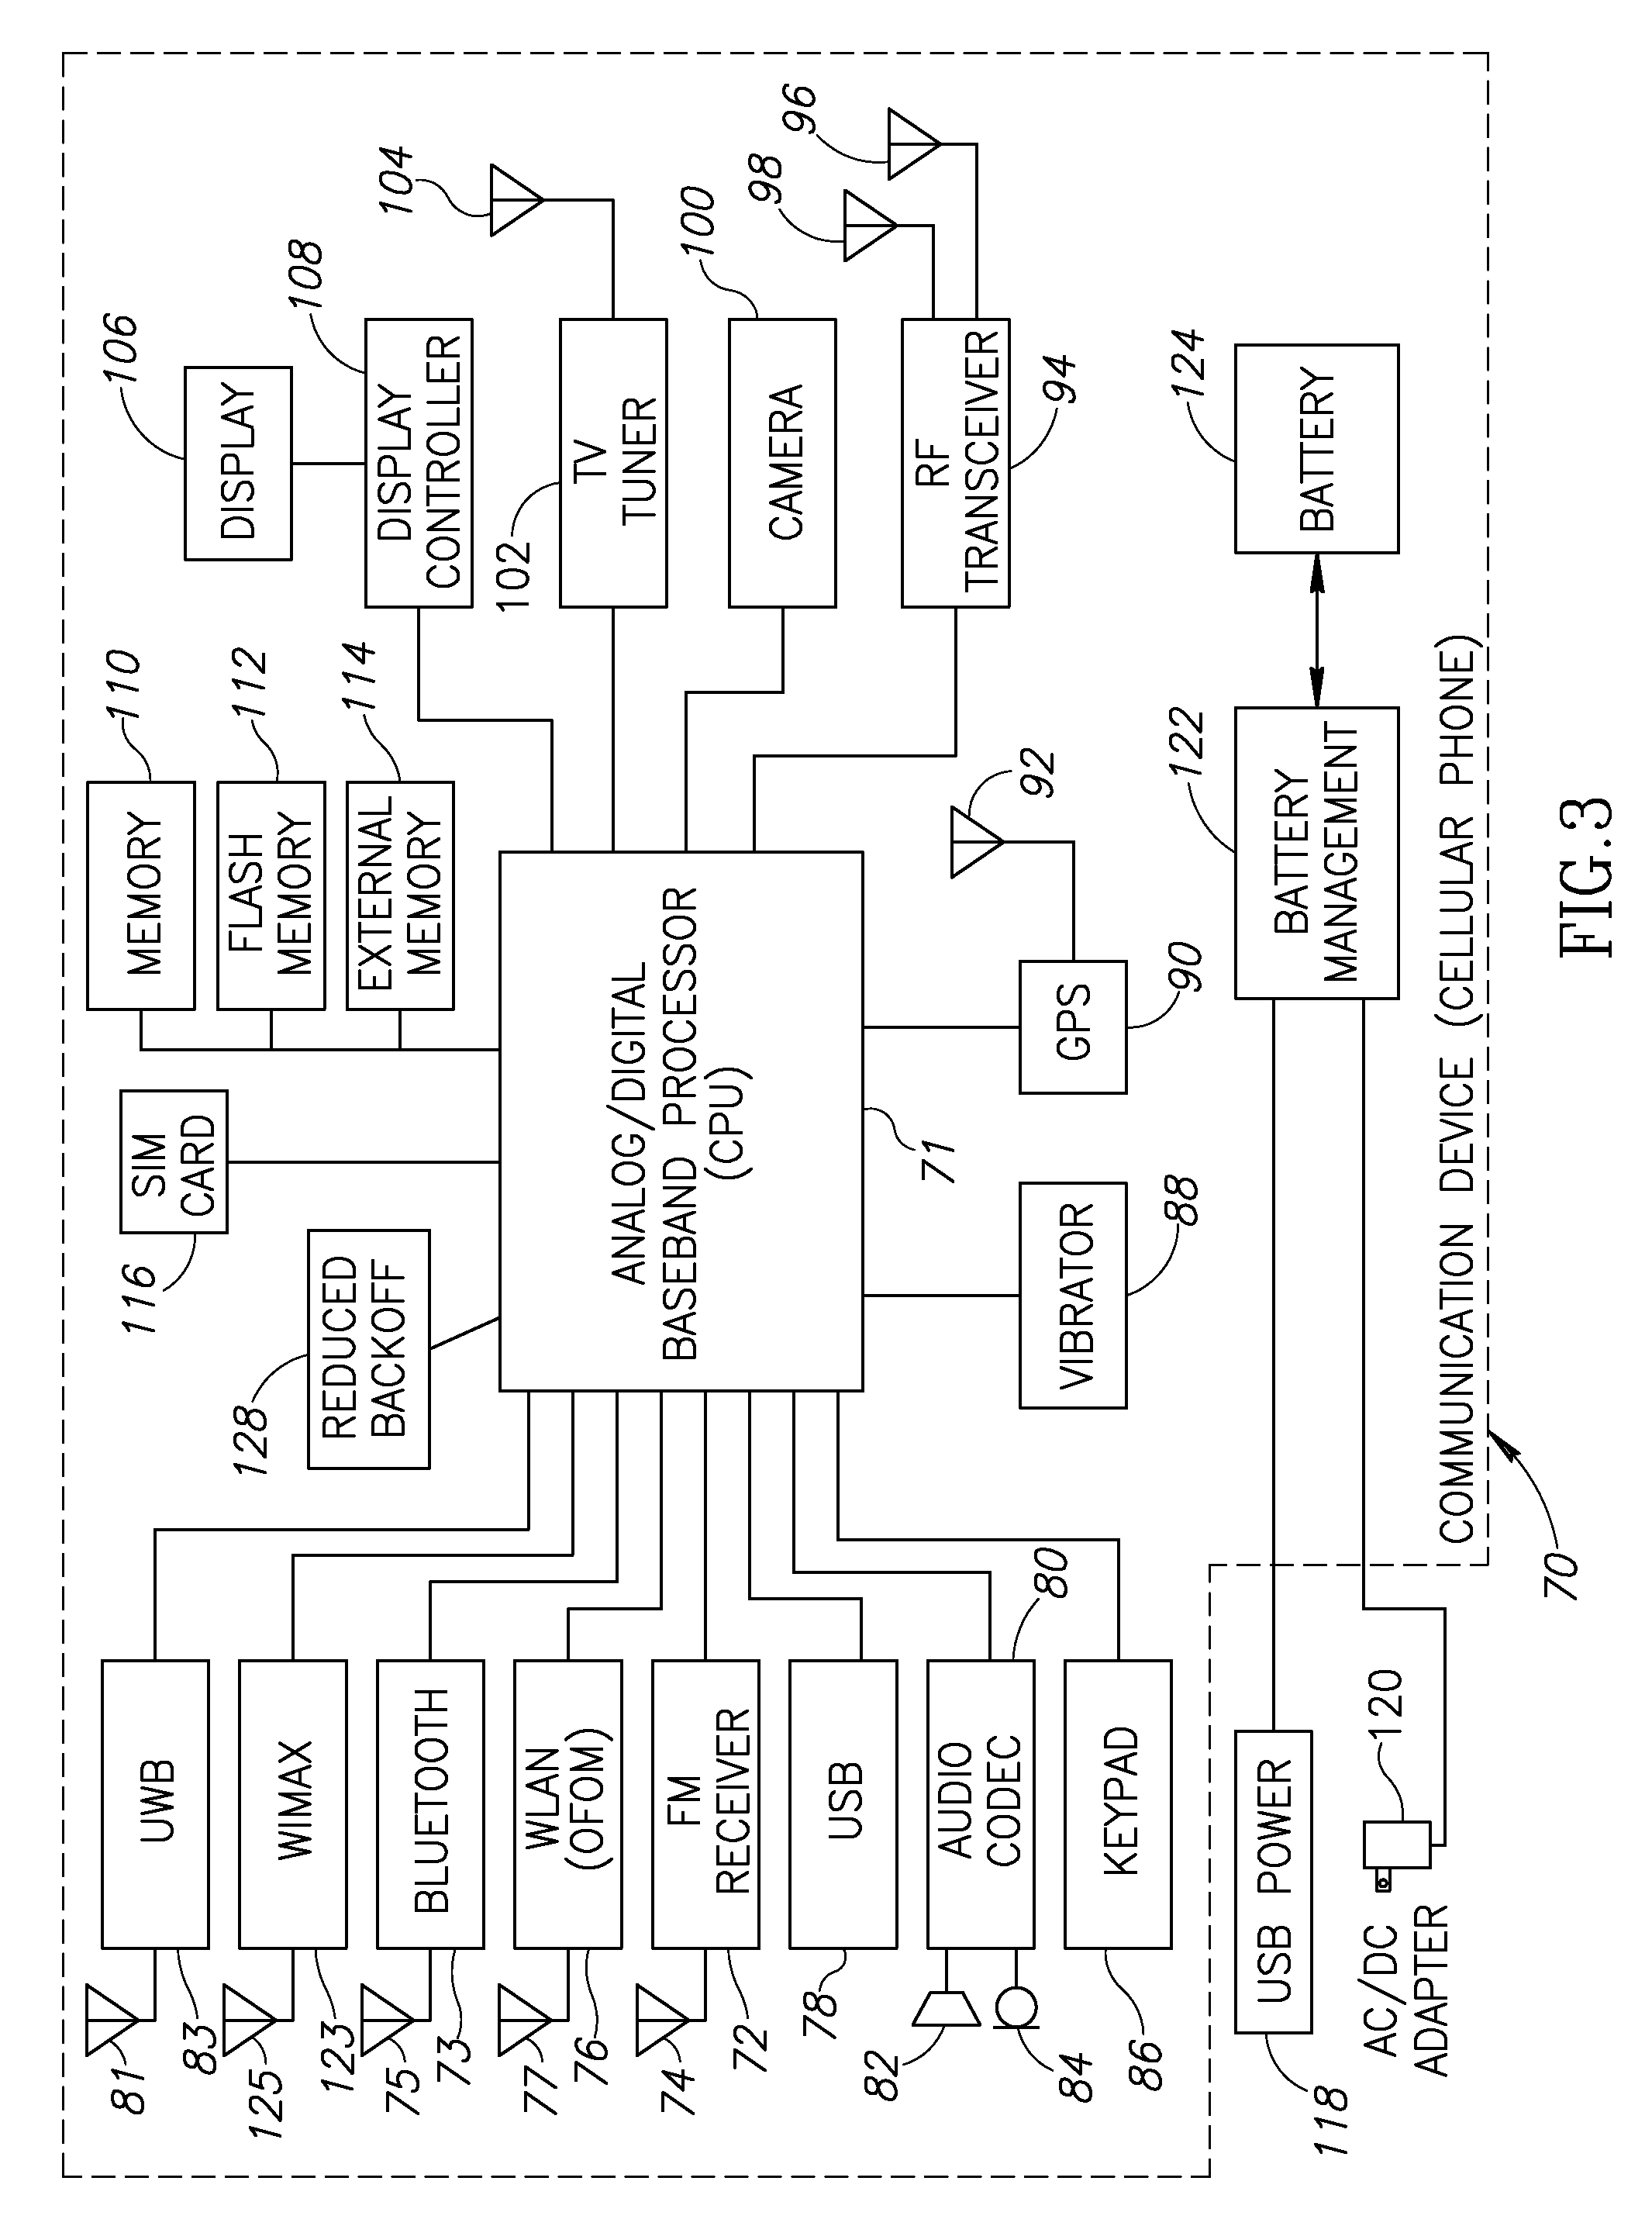 Apparatus for and method of minimizing backoff for orthogonal frequency division multiplexing transmission